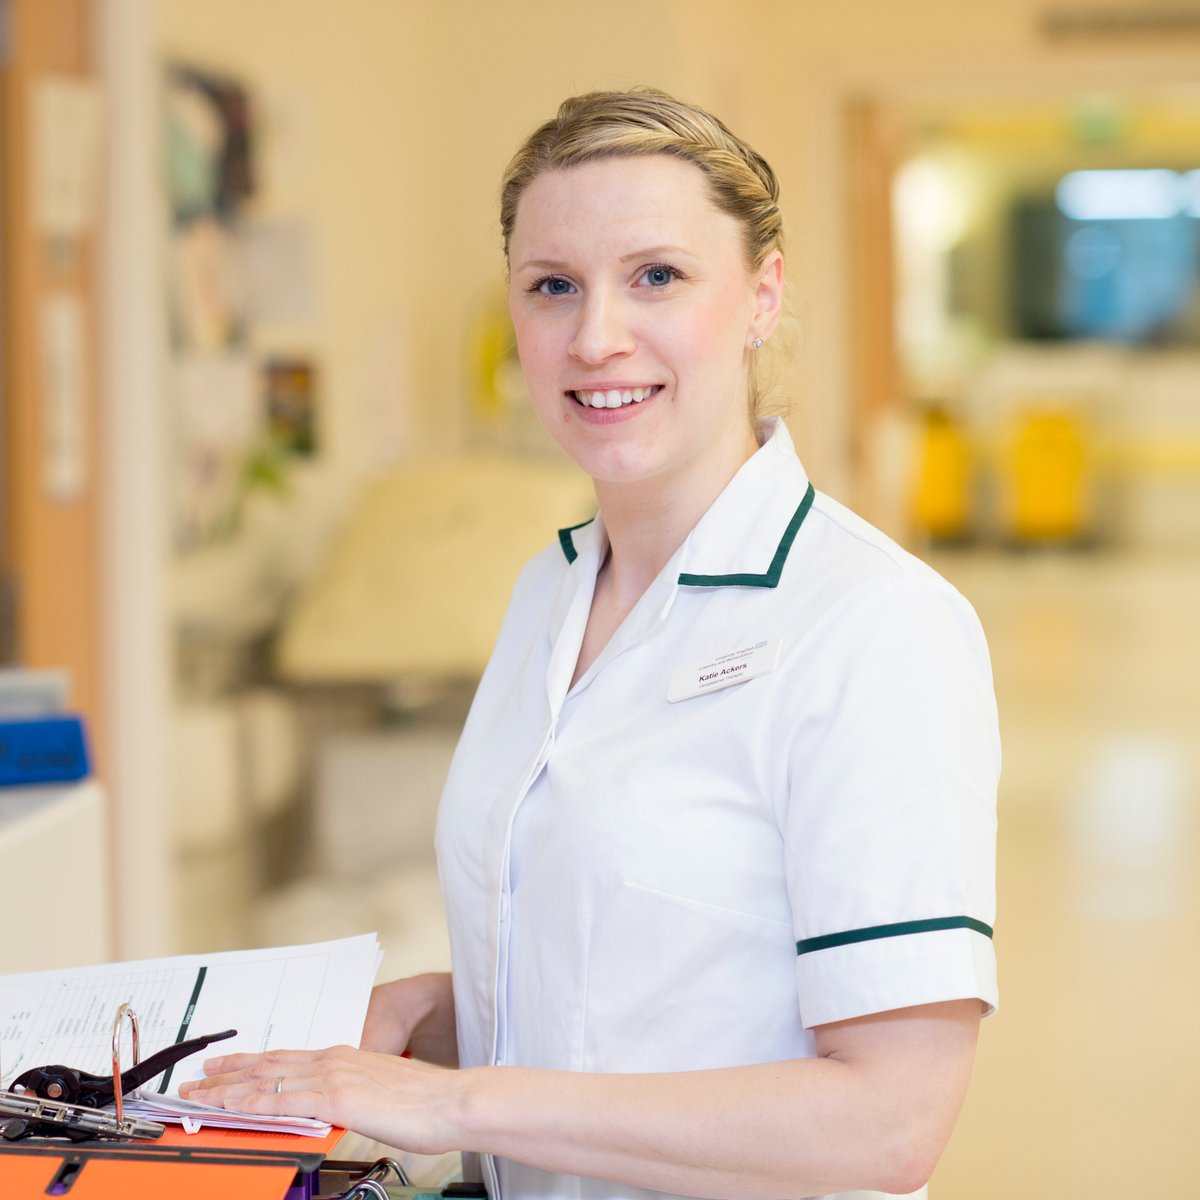 🚨Join REACT's dynamic team as Band 5-6 Development post for Occupational Therapists! 💼Enjoy flexible hours, comprehensive support, and a chance to grow both professionally and personally. 🌟Apply now: jobs.uhcw.nhs.uk/job/v6161186